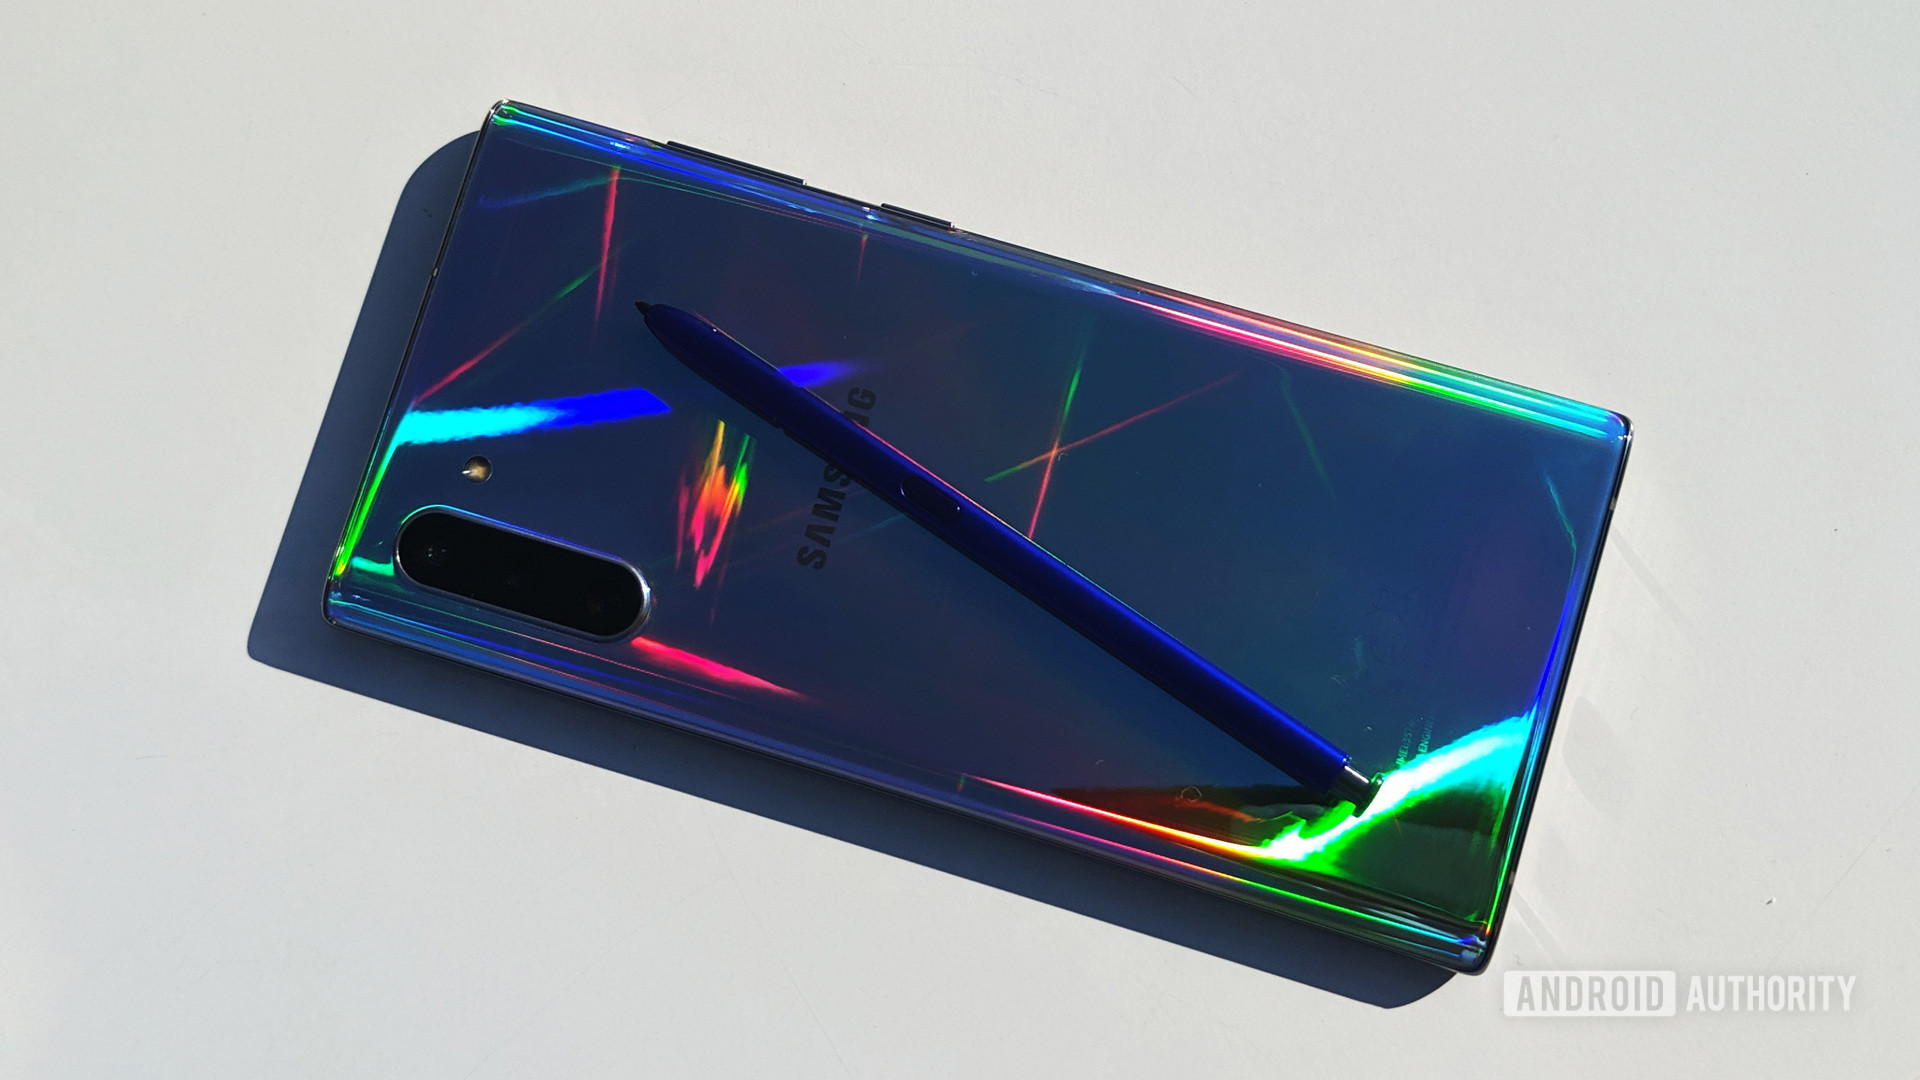 Samsung Galaxy Note 10 and S Pen on table with colored reflections